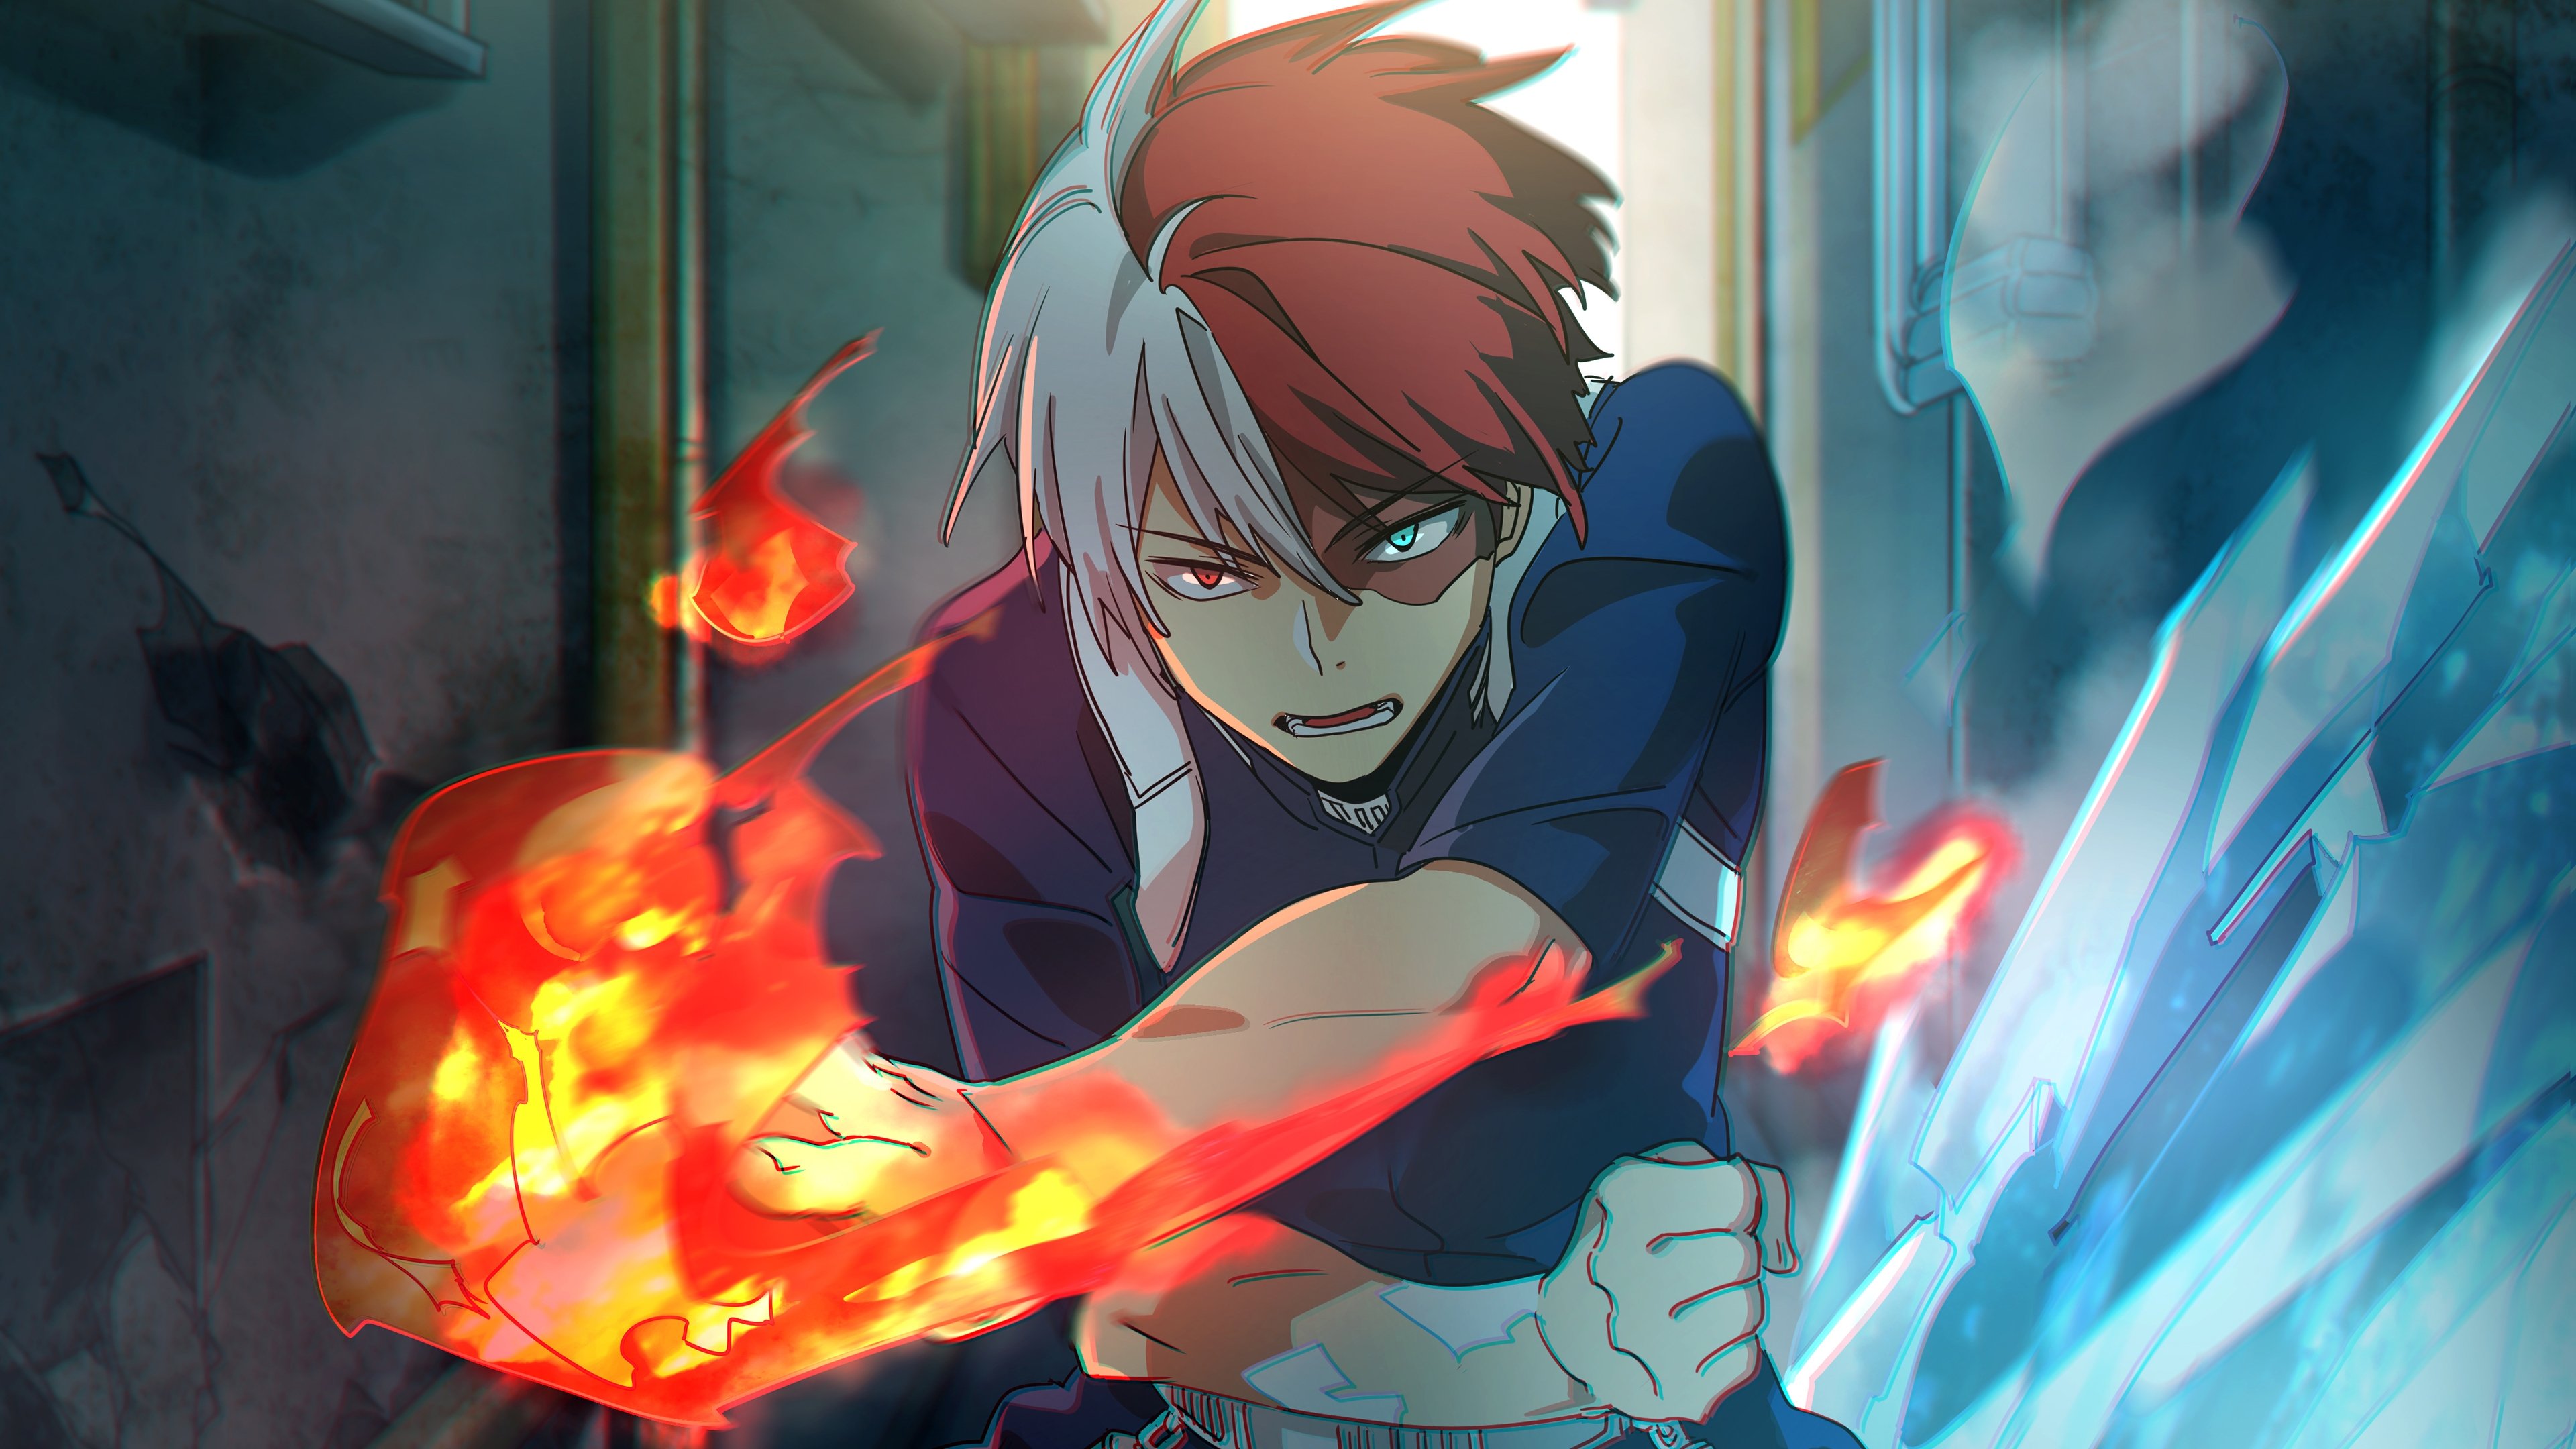 Wallpaper Of Shoto Todoroki / Quick access to your emails and social ...